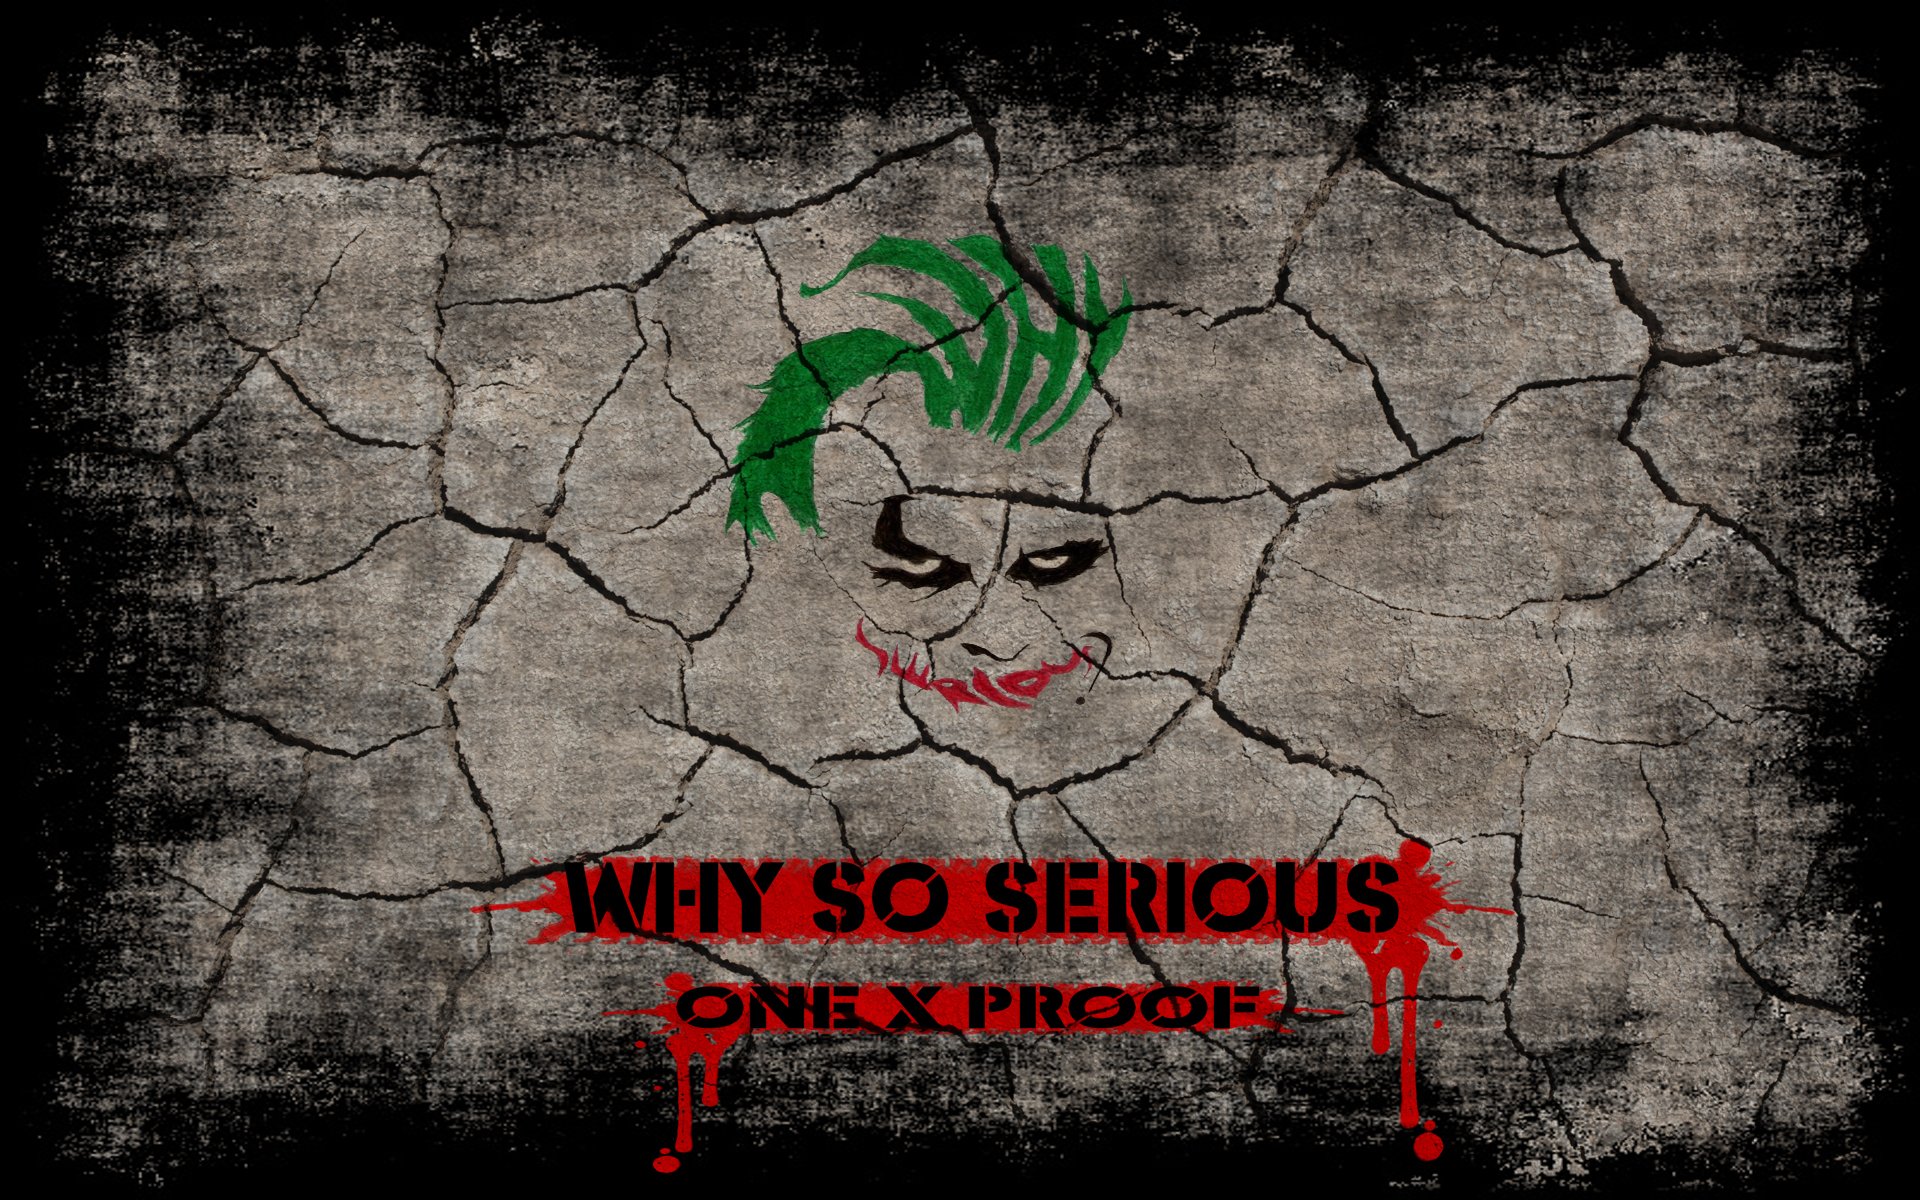 joker why so serious by OneXpRooF on DeviantArt